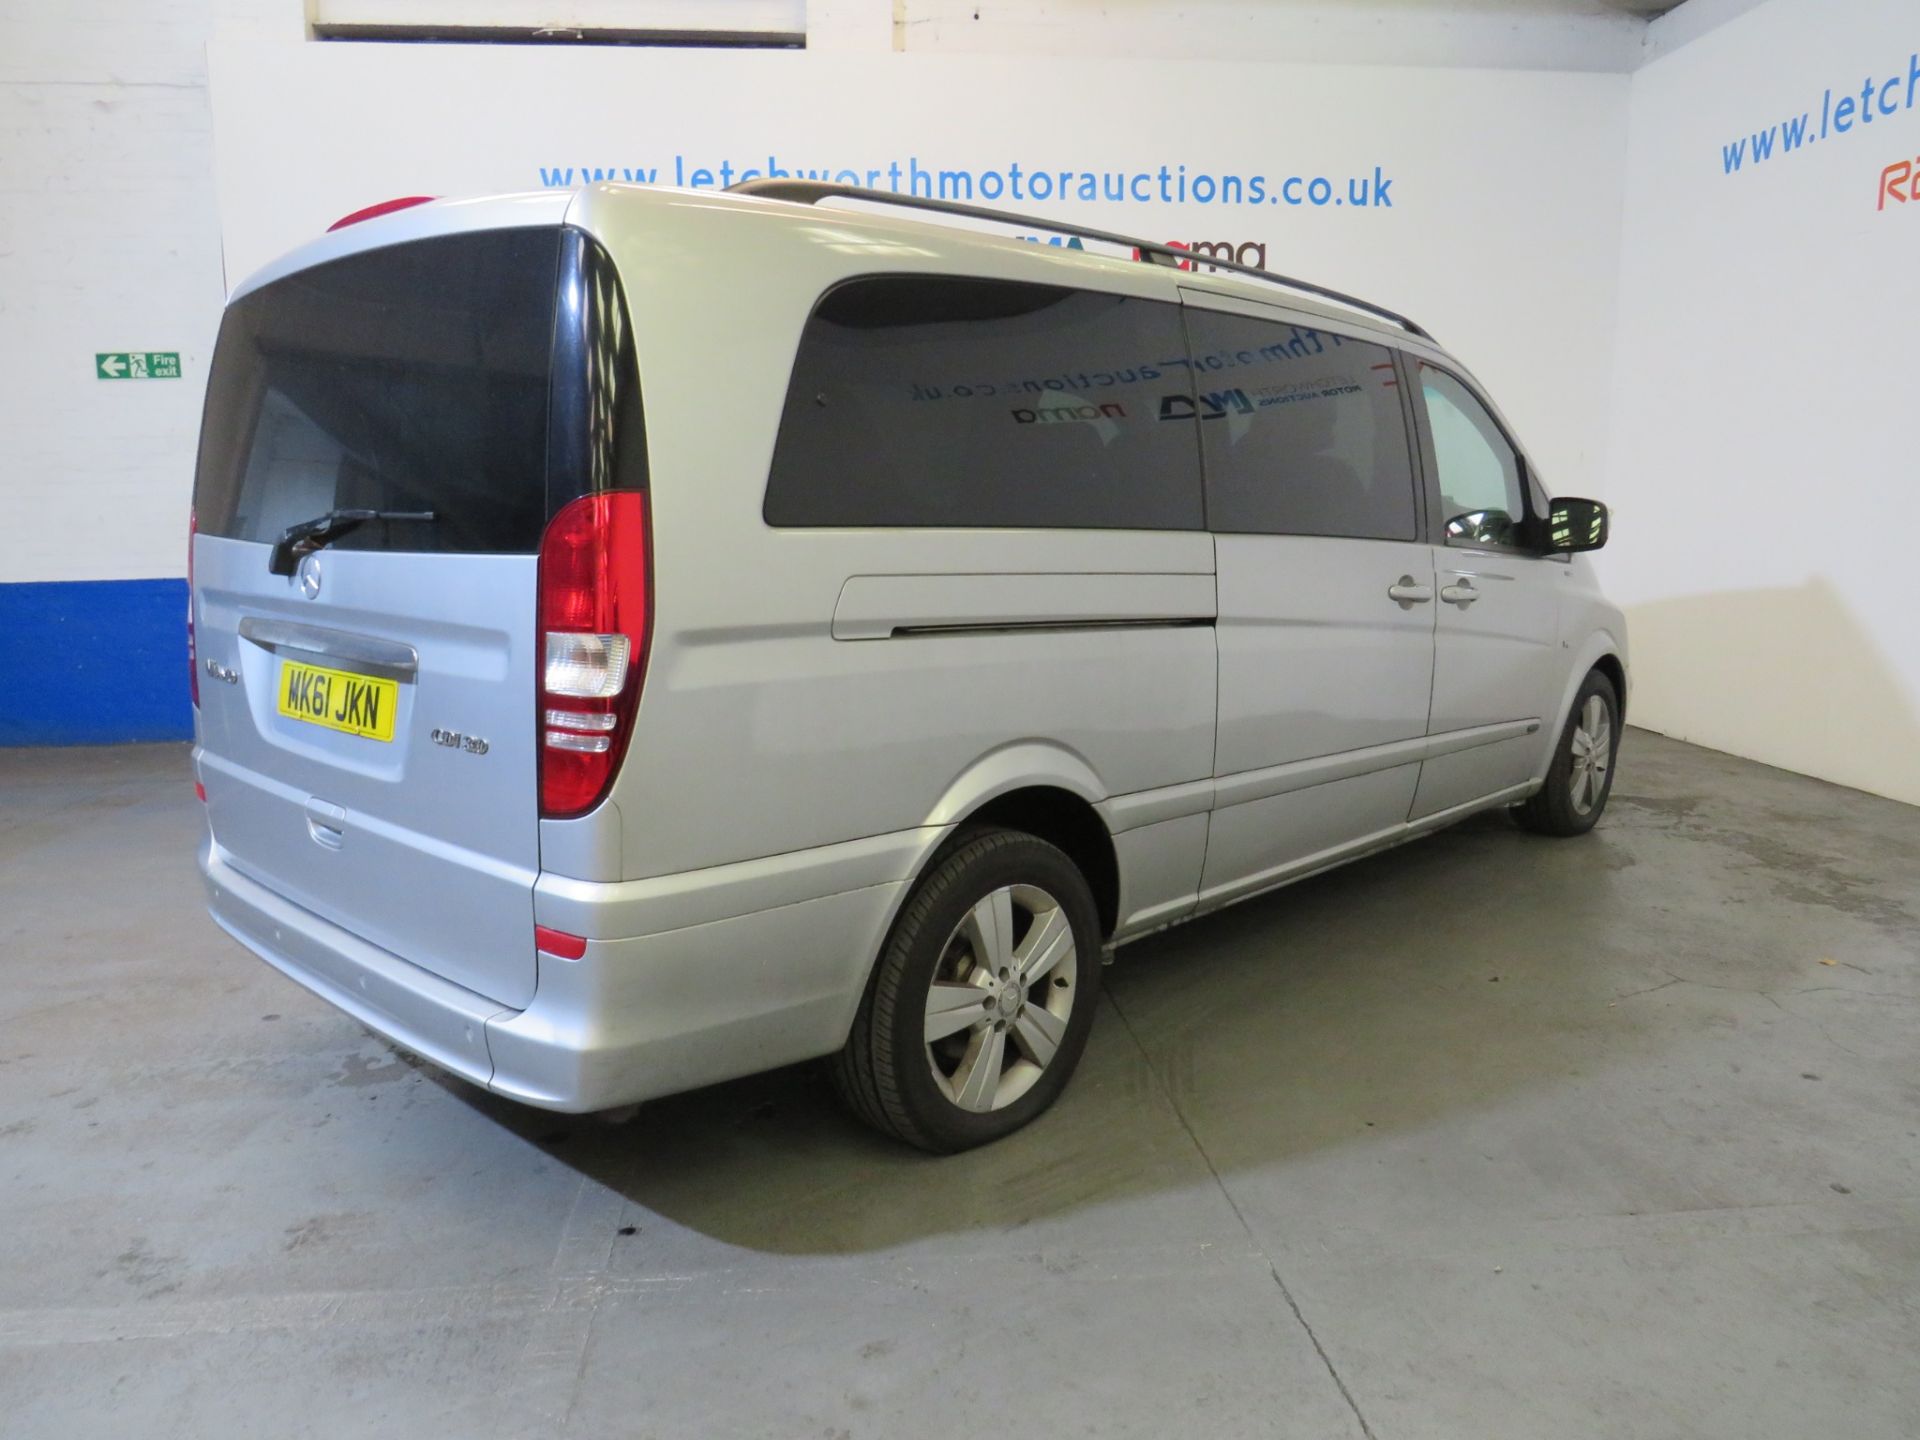 2011 Mercedes Benz Viano Ambient 3.0 CDI Blue Auto 8 Seater - 2987cc - Image 6 of 10